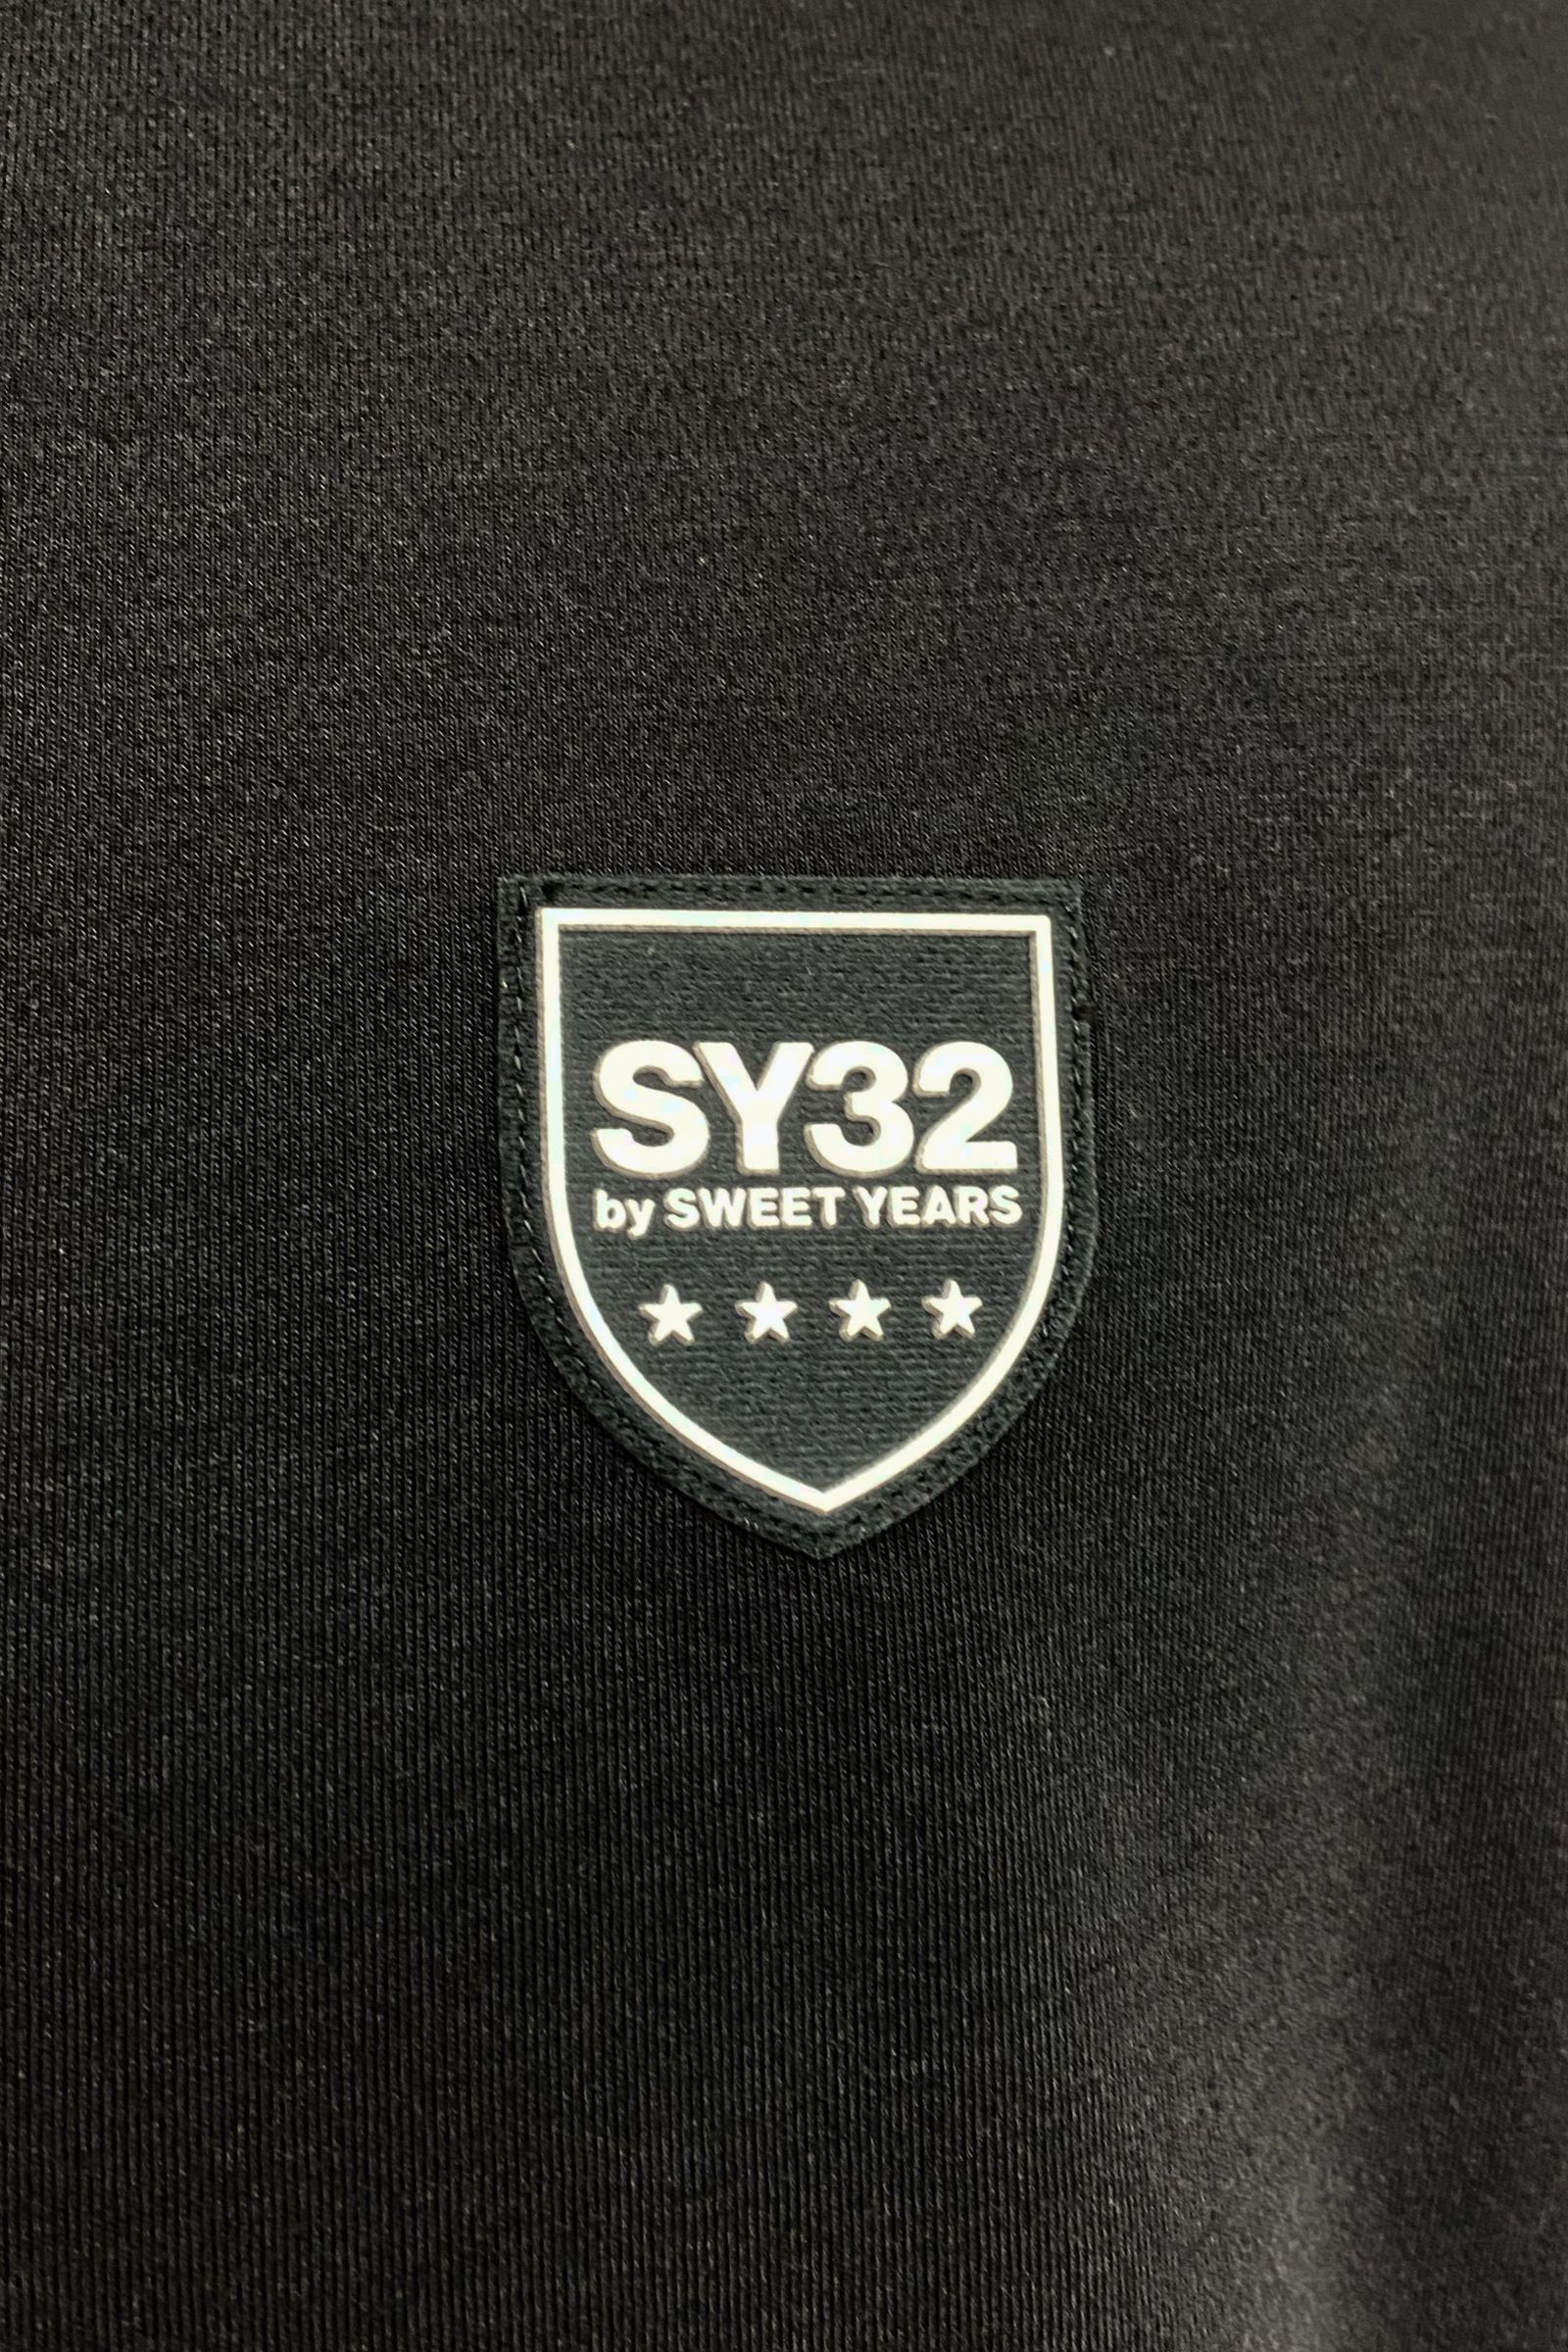 NECK DESIGNS L/S TEE / BLACK 【SY32 by SWEET YEARS】 - S